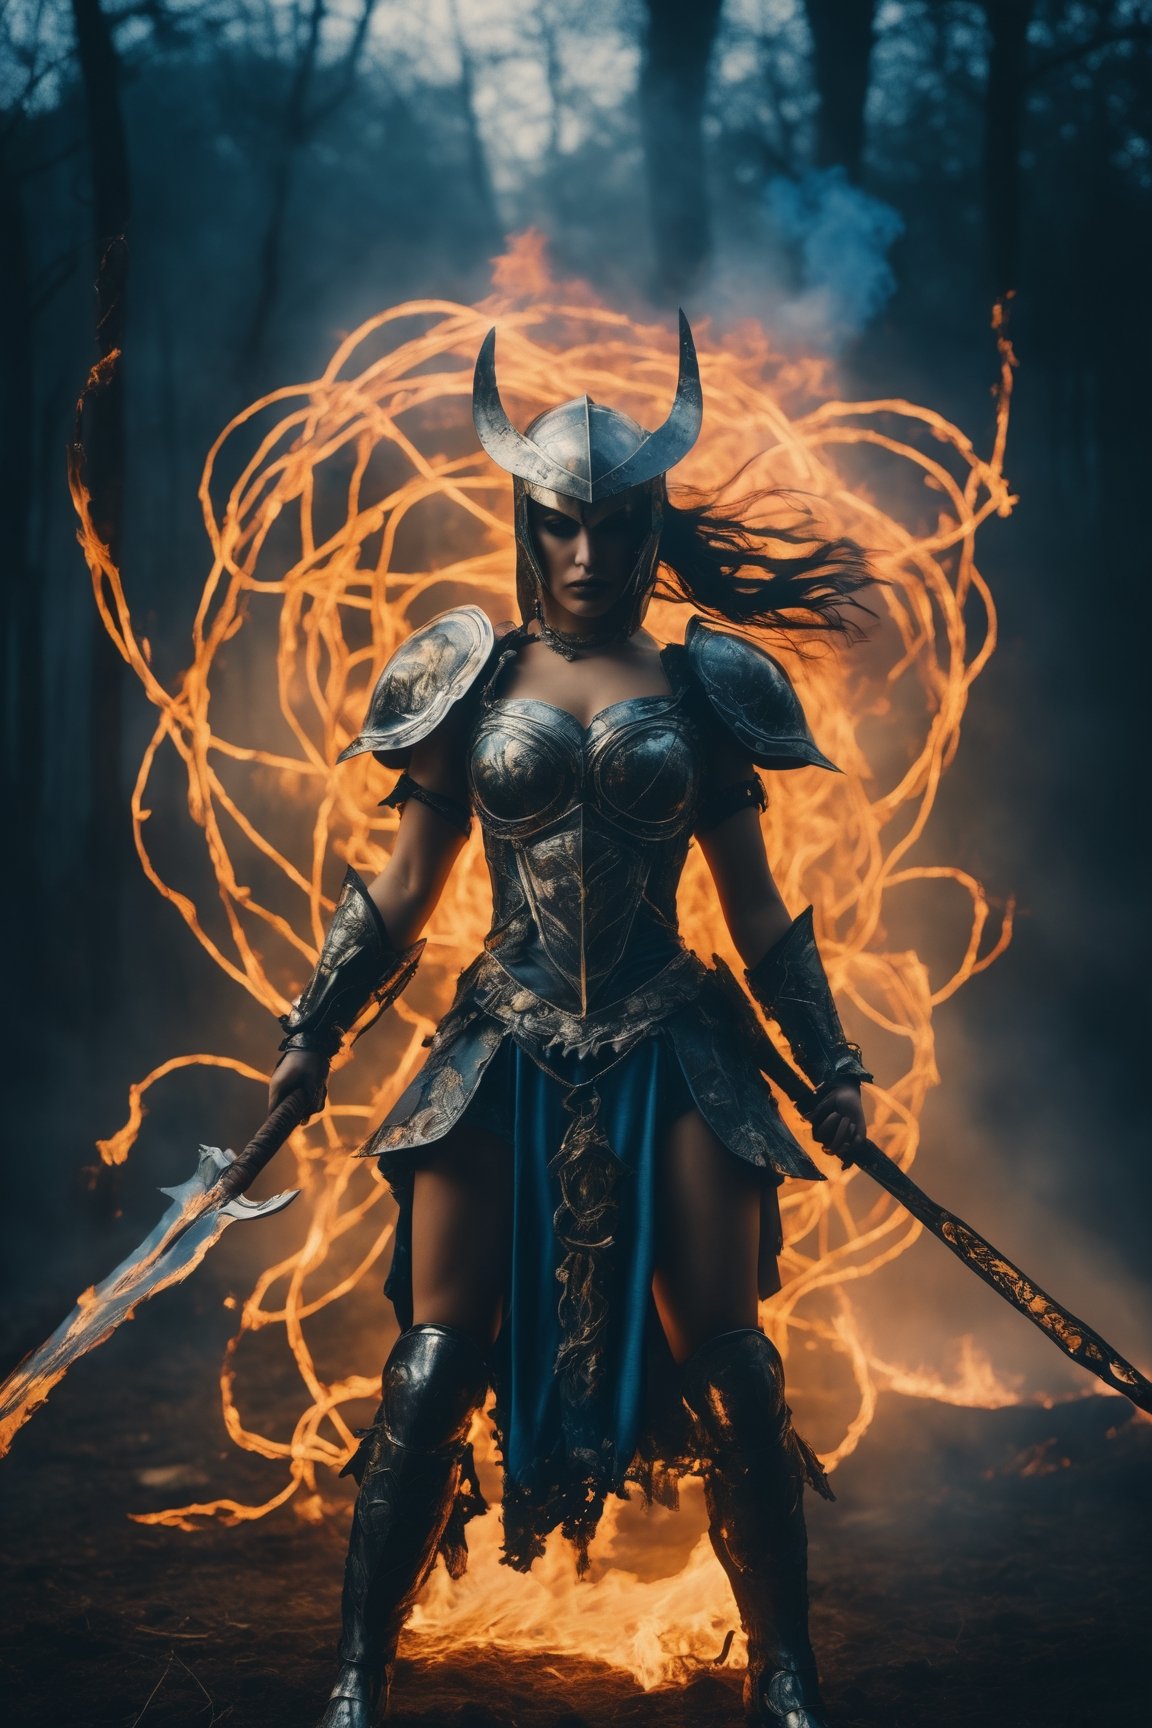 (ethereal and artistic:1.3), (metal maiden chaos warrior:1.2), Immerse yourself in an ethereal and artistic composition featuring a metal maiden chaos warrior akin to Superman, surrounded by fiery strings and skulls. The medium photography style combines dark vignetting, light leaks, and a gloomy, painterly atmosphere. Shot with a cracked lens on cyanotype, this 8K image boasts intricate detail and a whimsical, dreamy, and nostalgic feel, perfect for a unique and artistic portrayal.